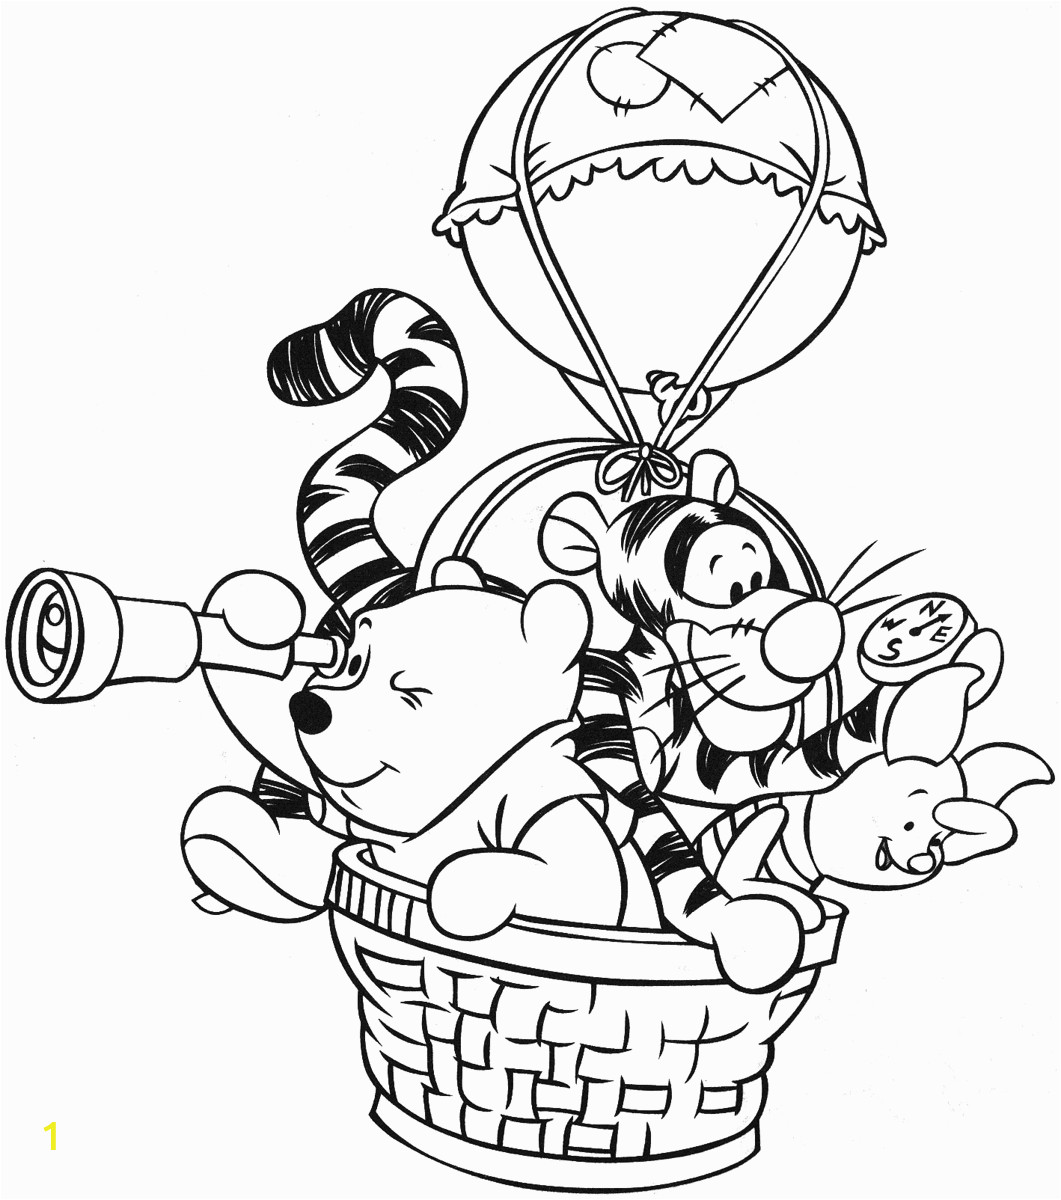 Printable Winnie the Pooh Coloring Pages Winnie the Pooh Coloring Page Free Coloring Pages